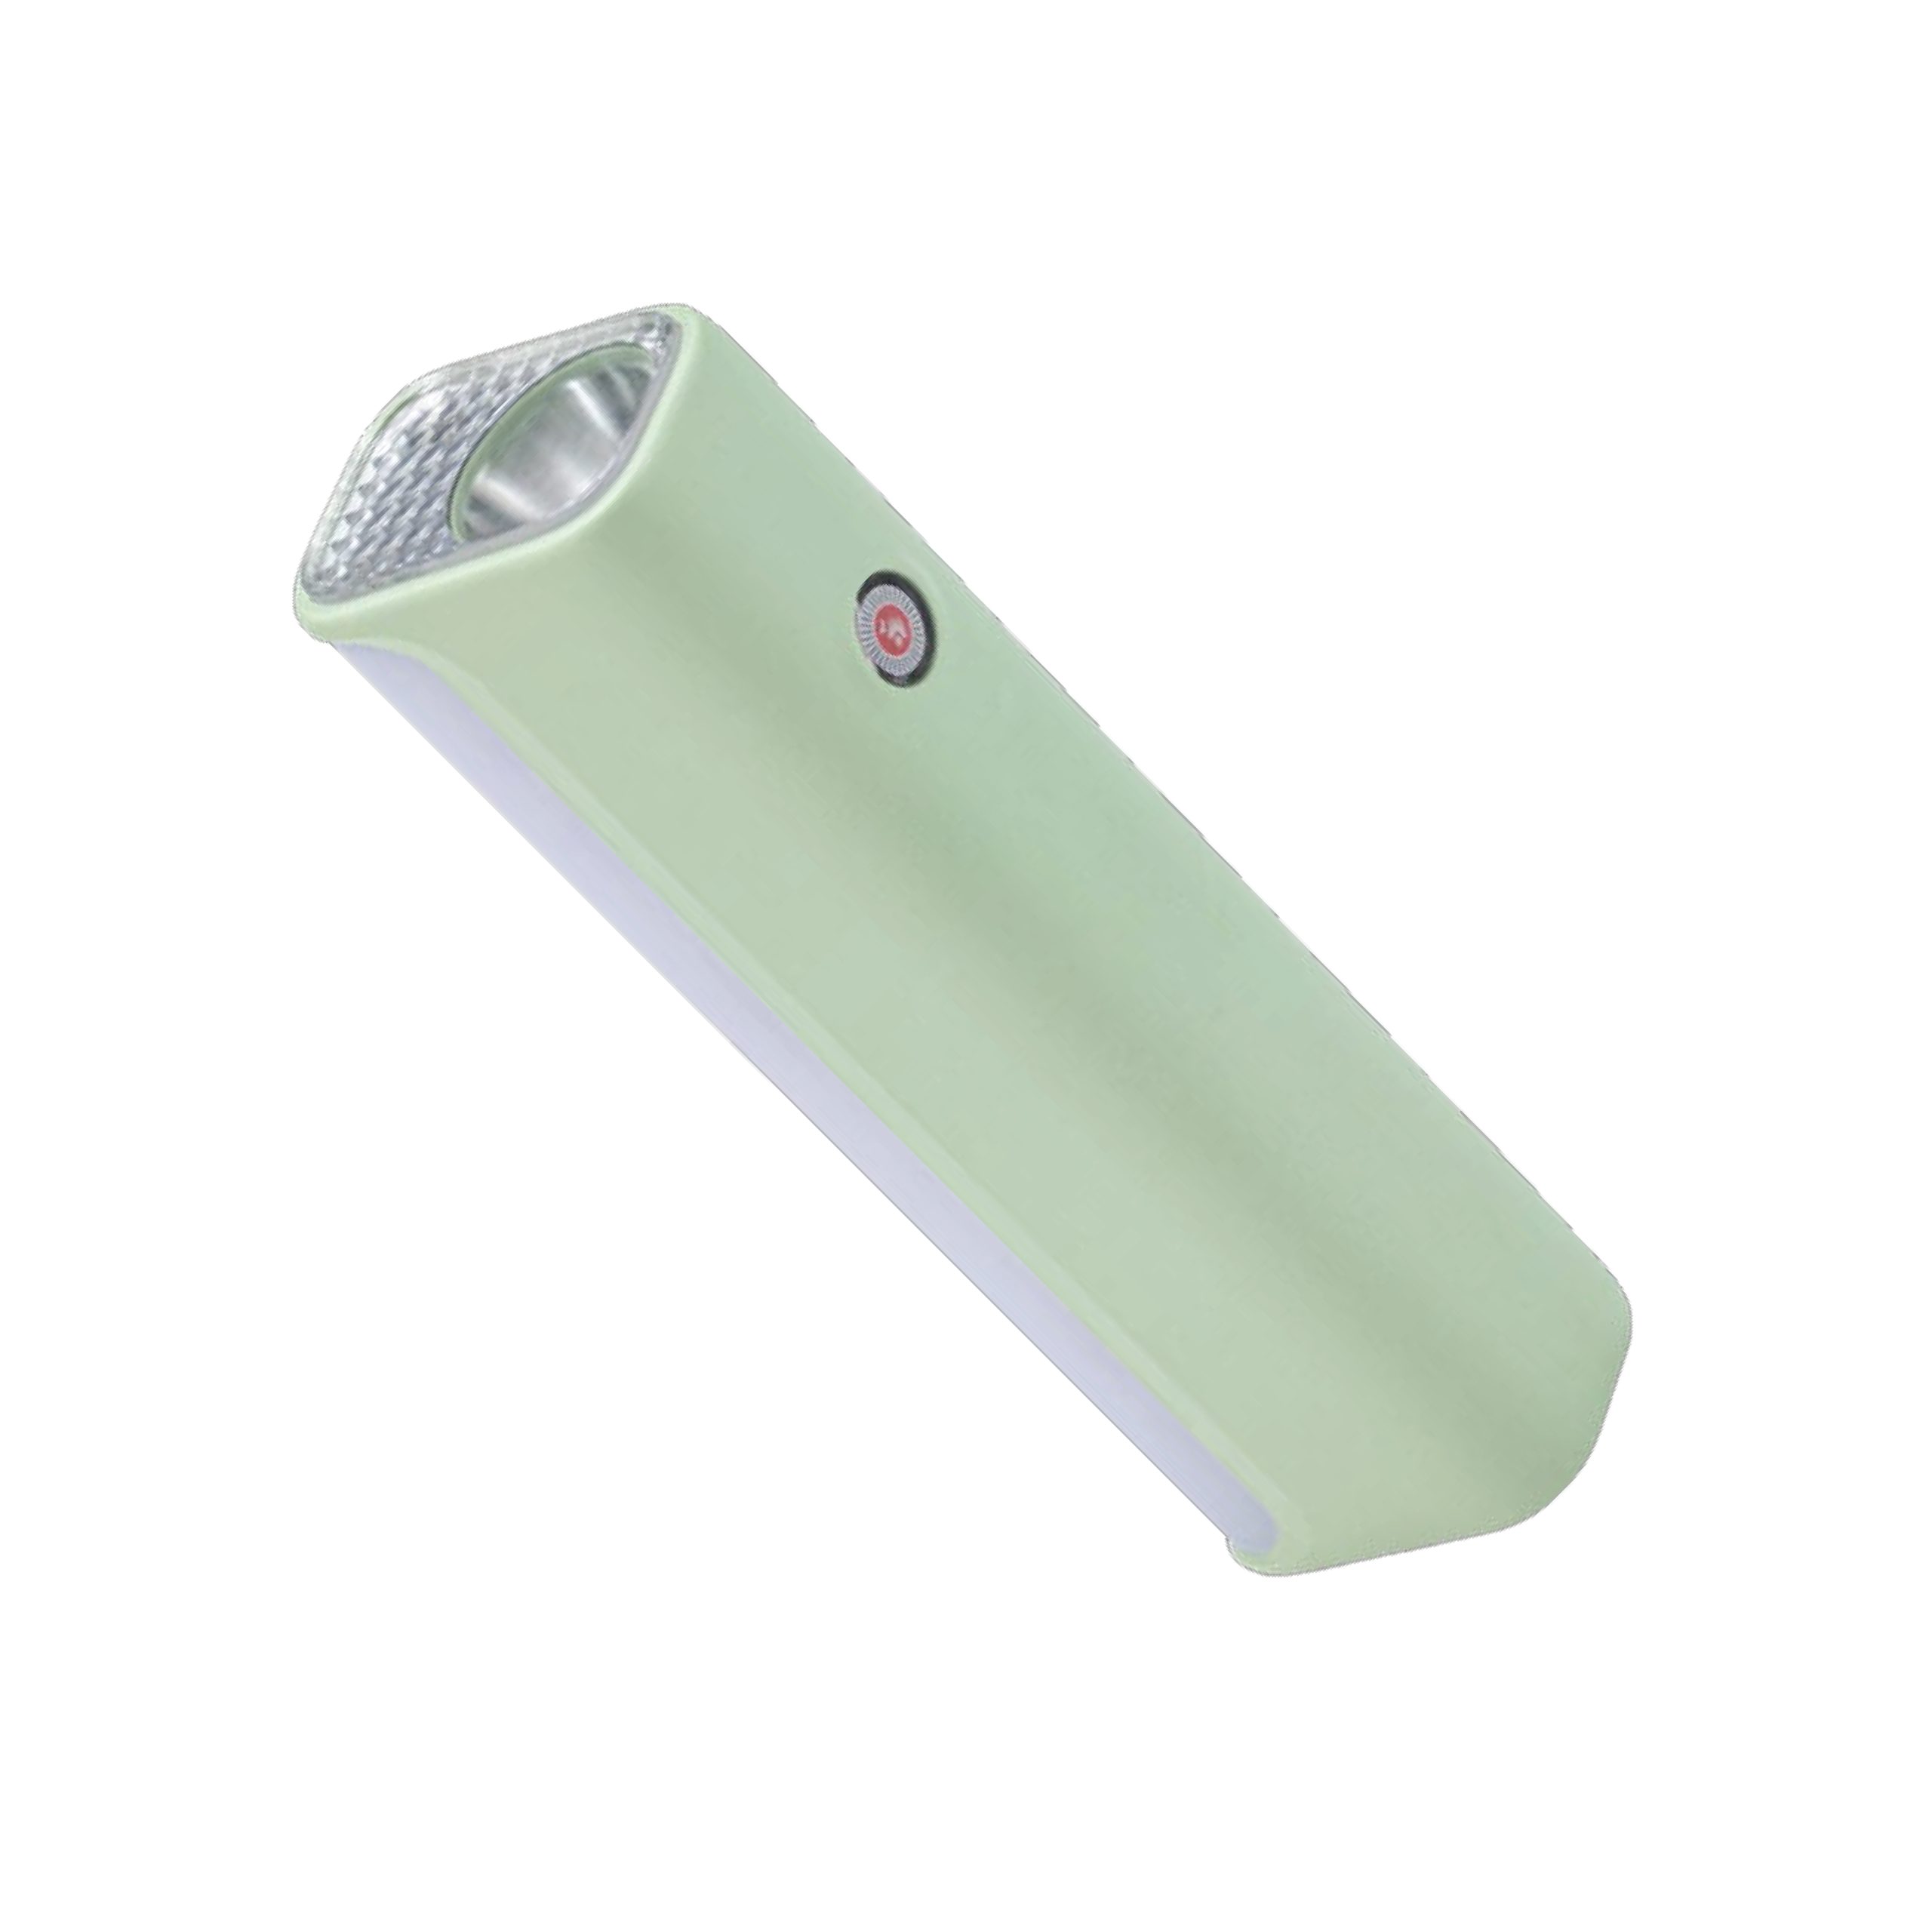 MR. Light Rechargeable Pocket Flashlight / Emergency Lamp, Dimmable & 3 Modes MRGD004